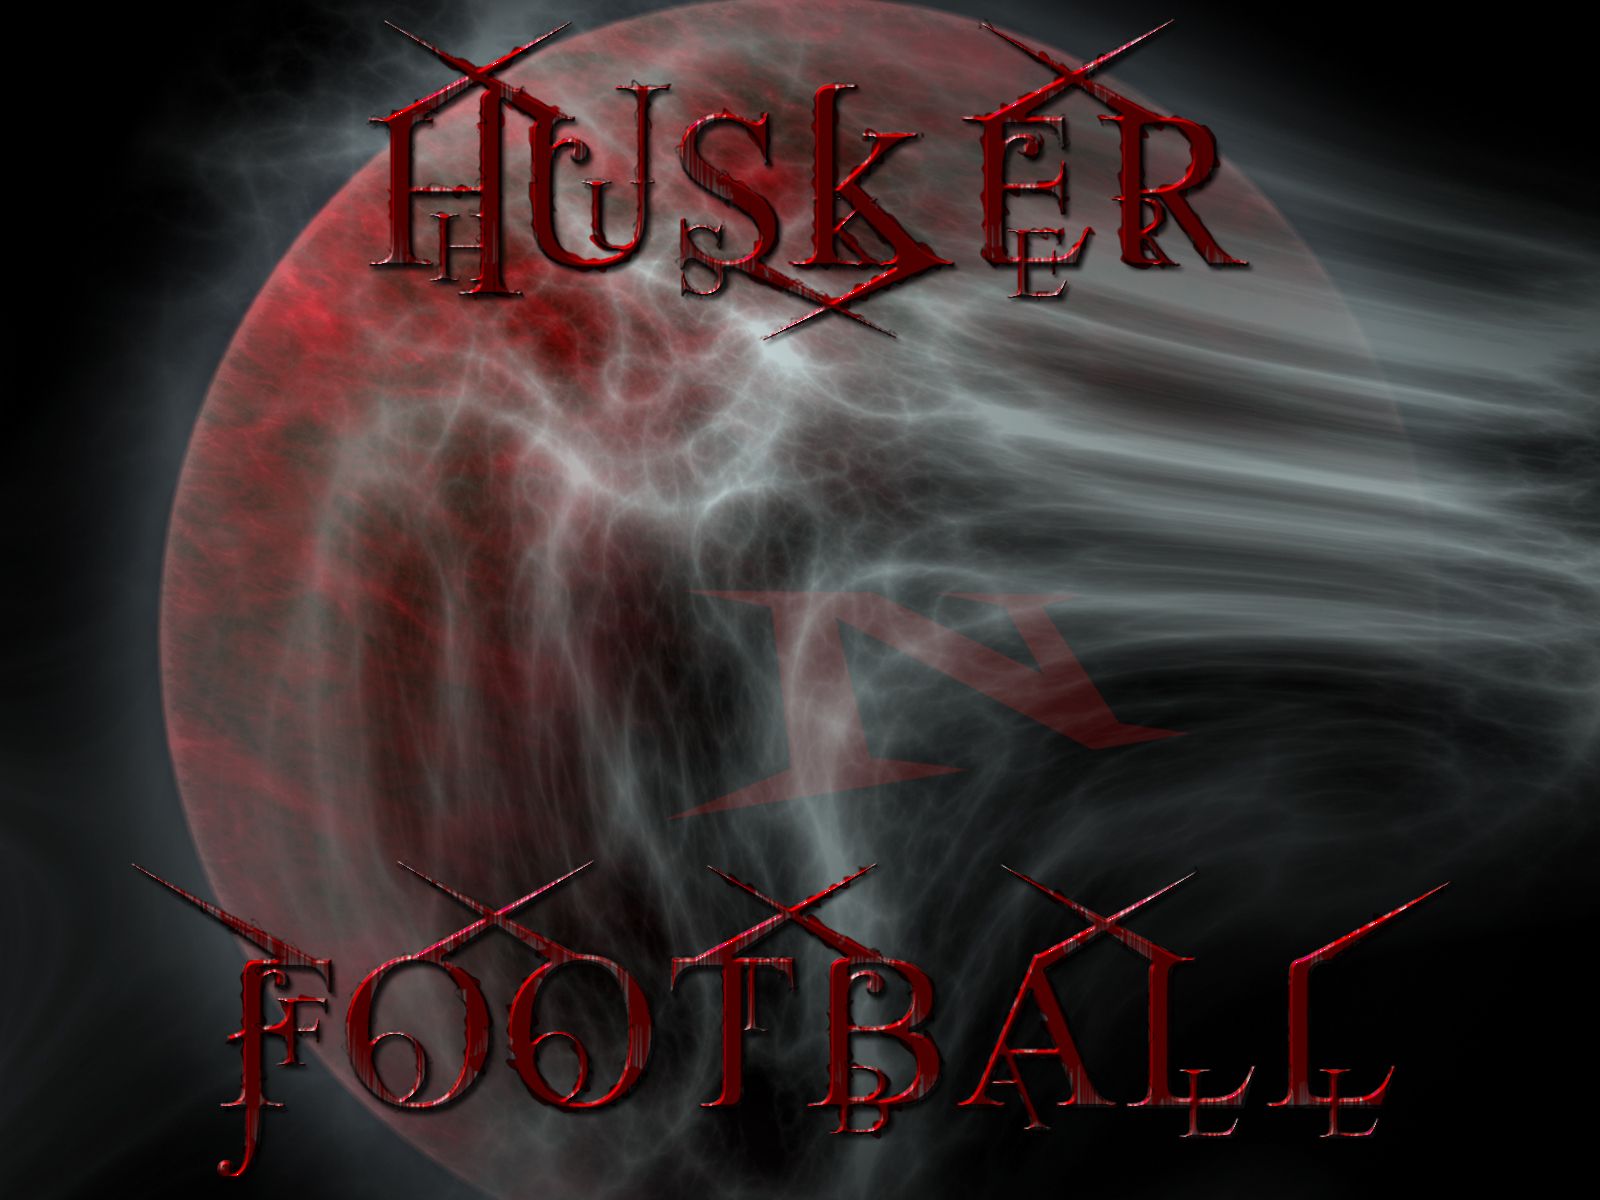 Wallpapers By Wicked Shadows: Husker Football Blood Moon Wallpaper